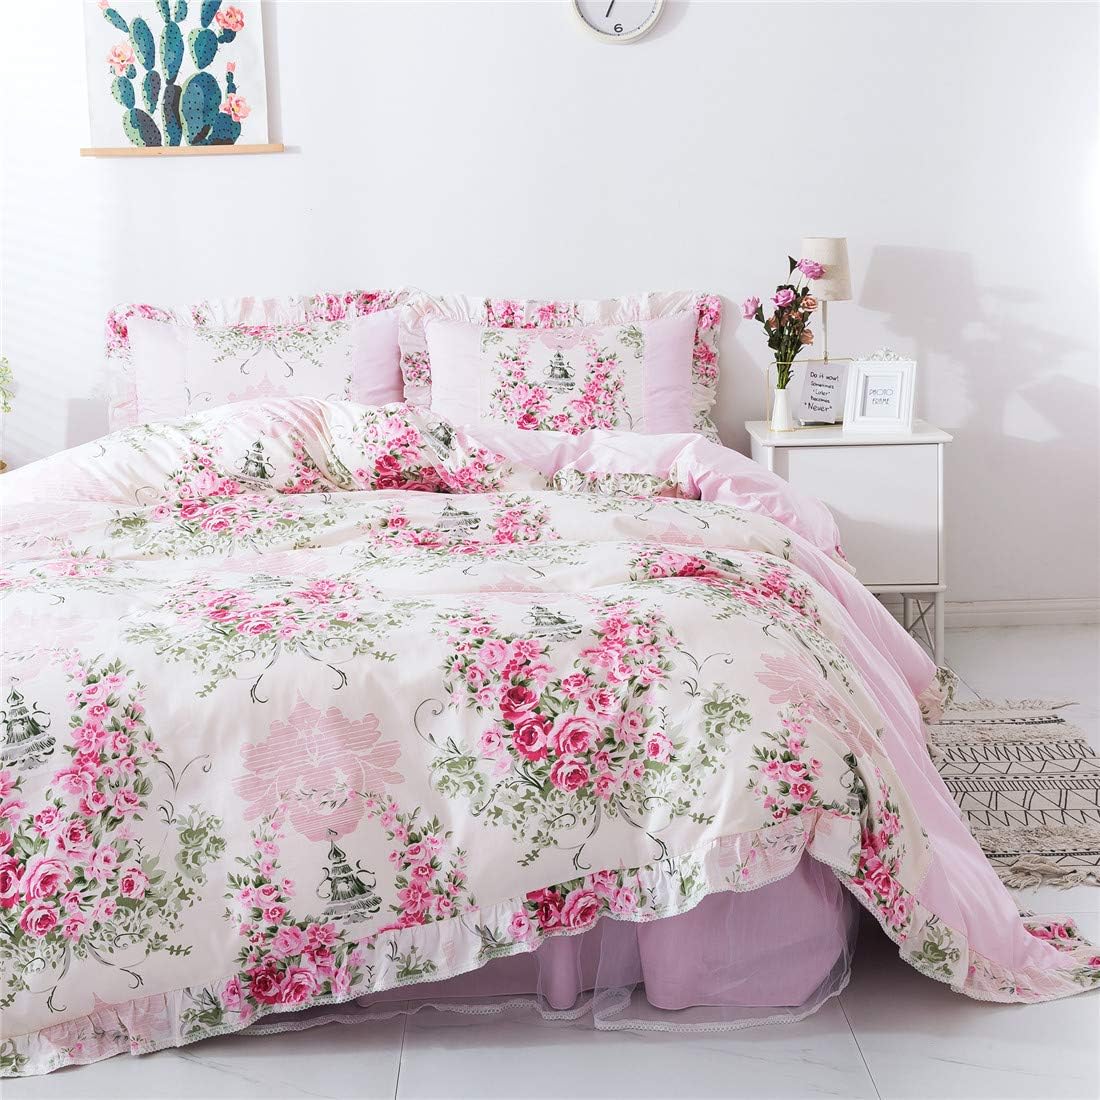 FADFAY Home Textile Pink Rose Floral Print Duvet Cover Bedding Set for Girls 4 Pieces Twin Size